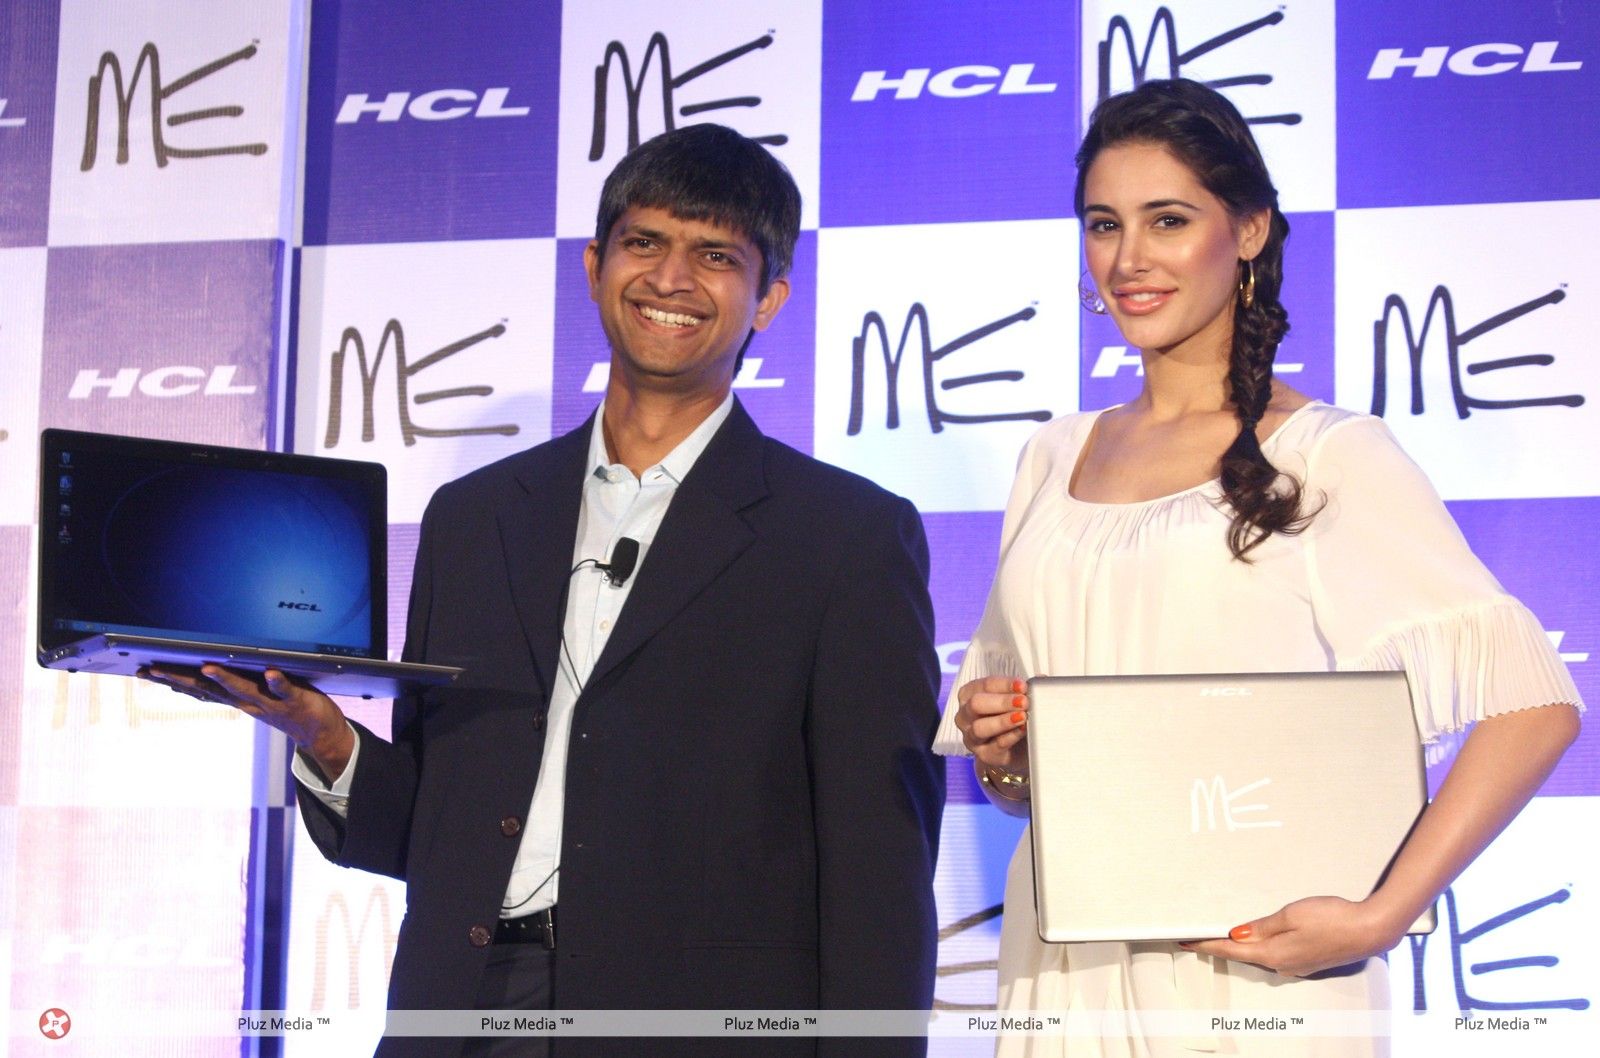 Nargis Fakhri at the launch of HCL Me Ultrabook Photos | Picture 279279